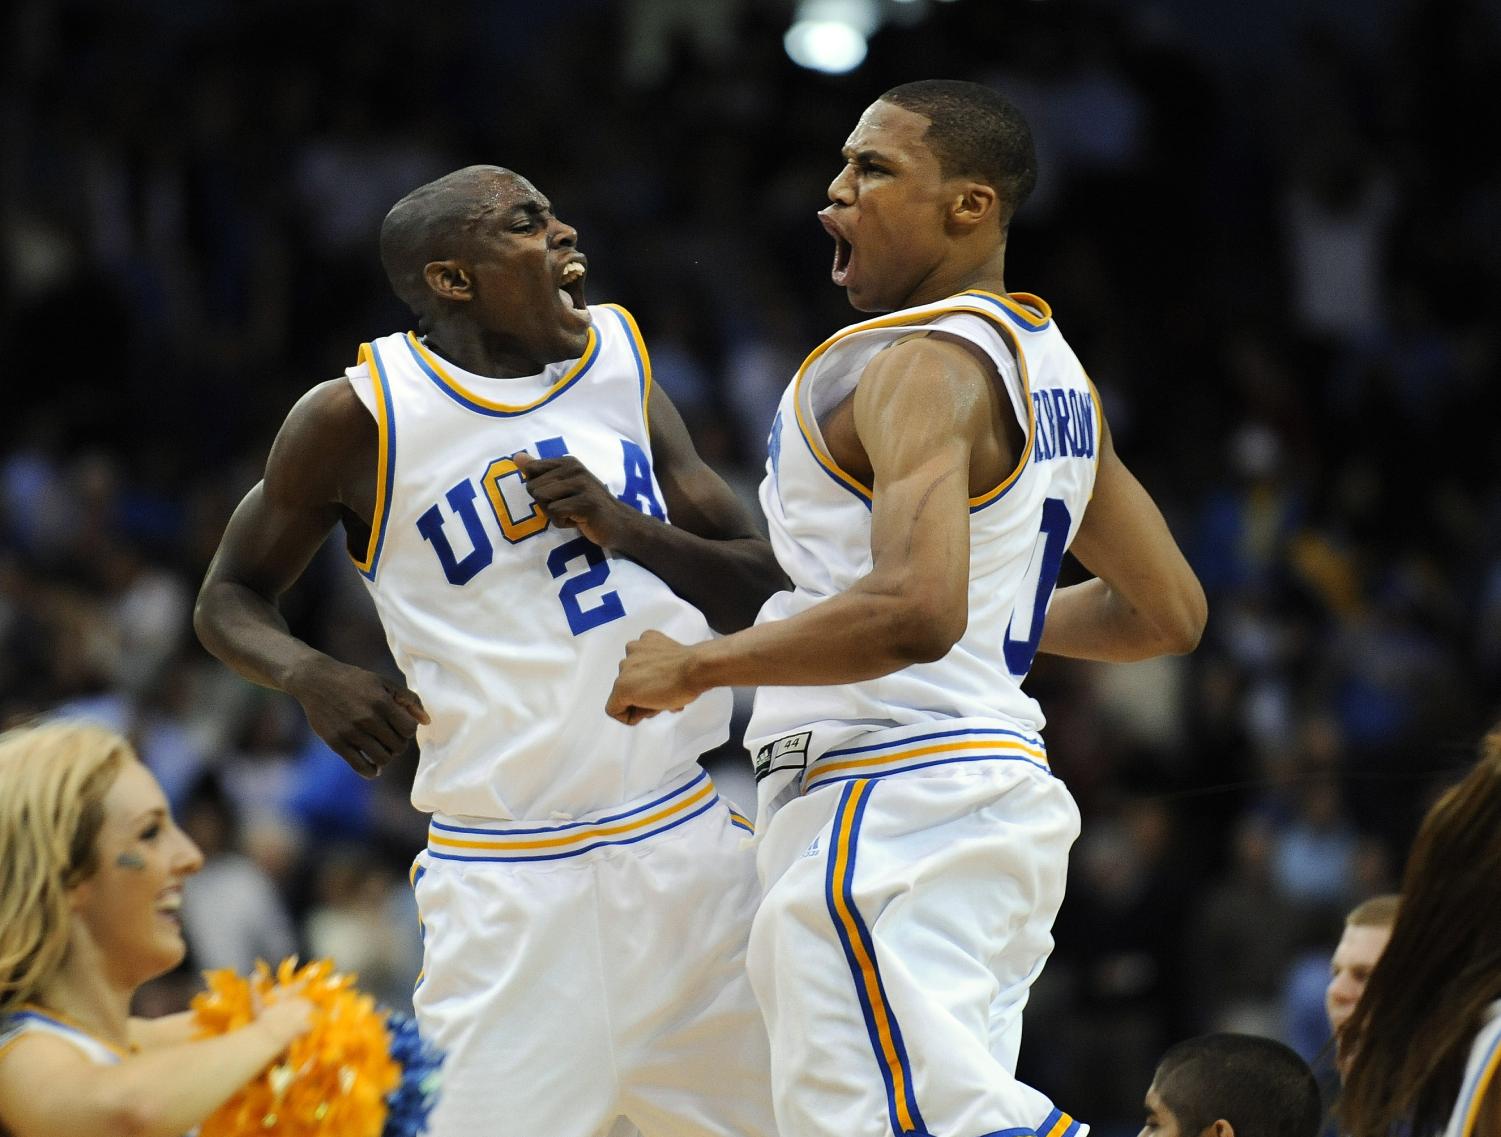 Sonics take UCLA's Russell Westbrook with the No. 4 draft pick